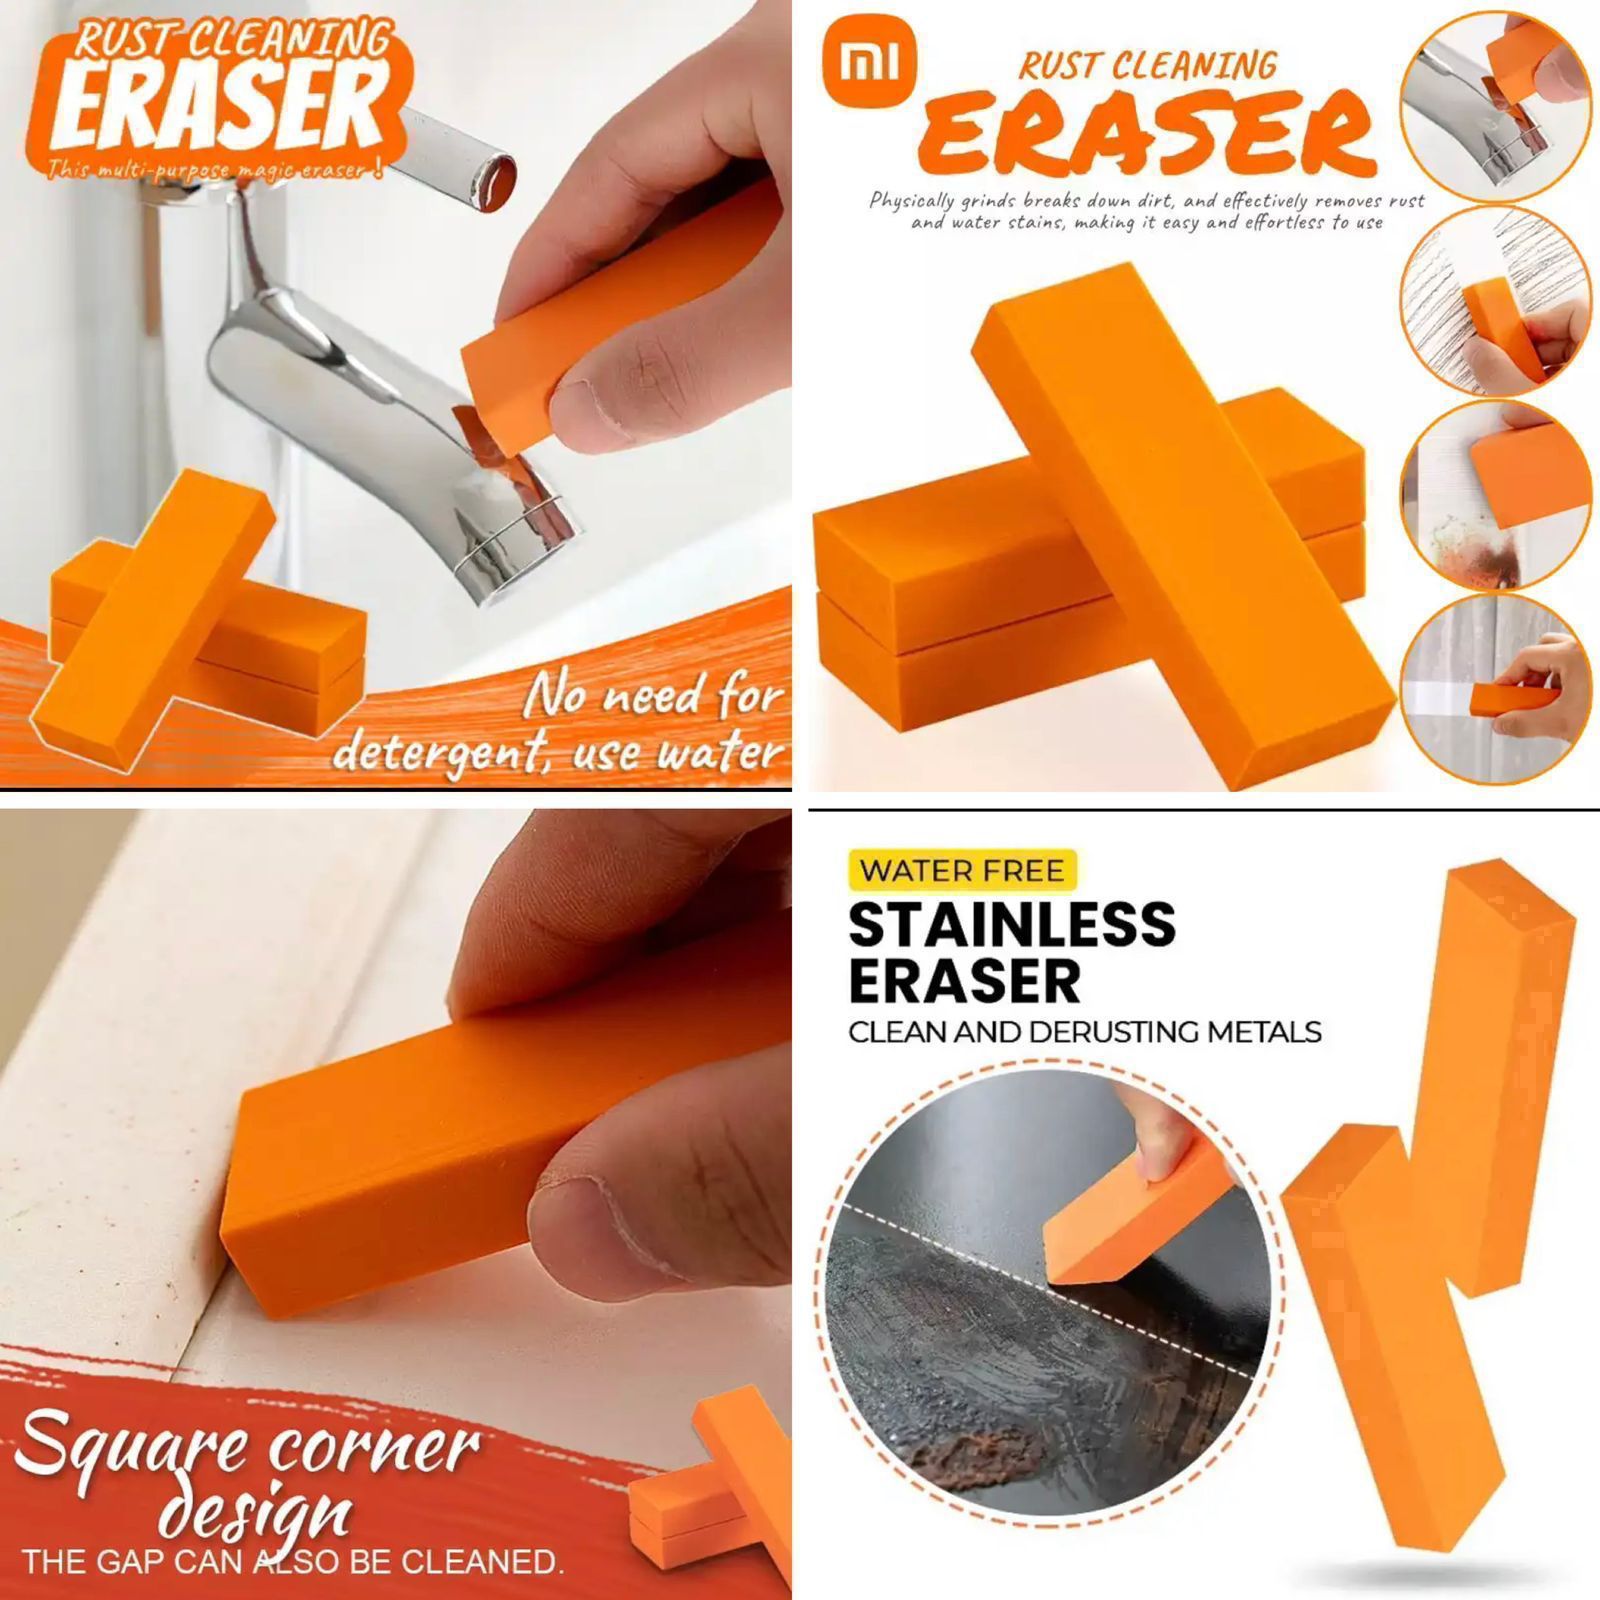 SkyShopy Rust Cleaning Easy Limescale Eraser Artifact, Stainless Steel Stains Eraser Decontamination Cleaner Eraser Rust Remover for Kitchen Home